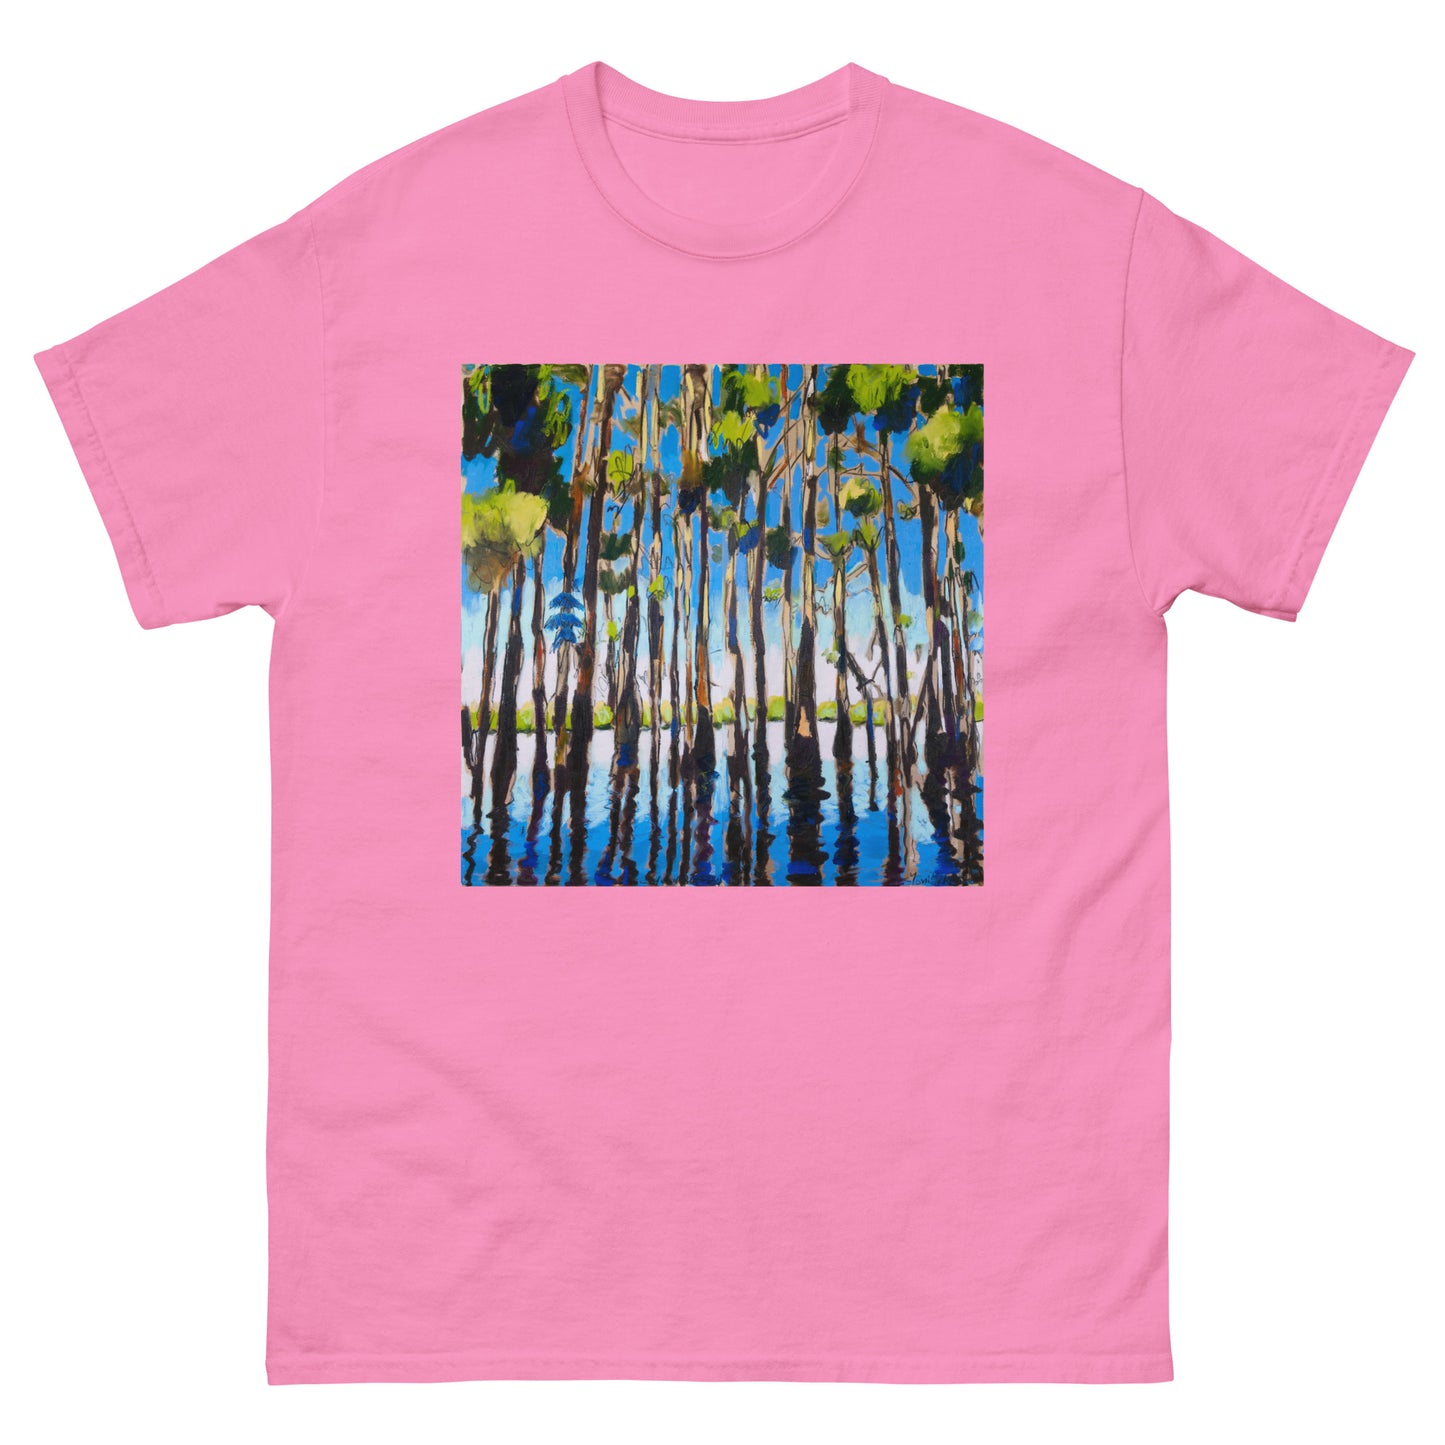 Square Cypress Reflections Unisex classic tee